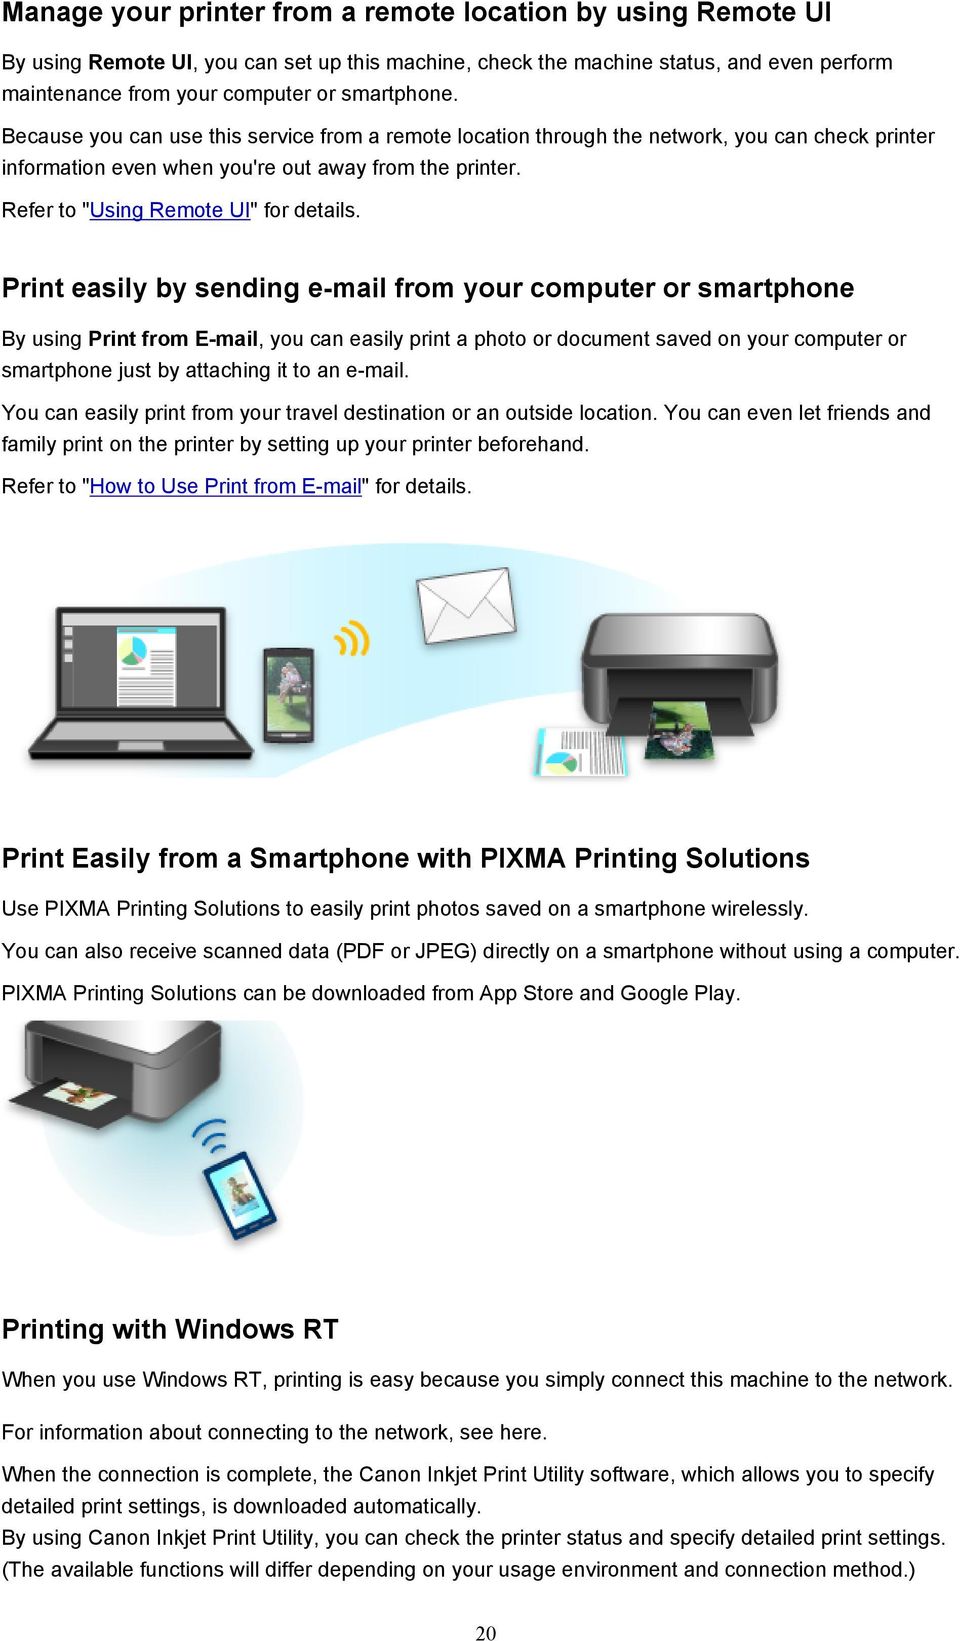 Print easily by sending e-mail from your computer or smartphone By using Print from E-mail, you can easily print a photo or document saved on your computer or smartphone just by attaching it to an